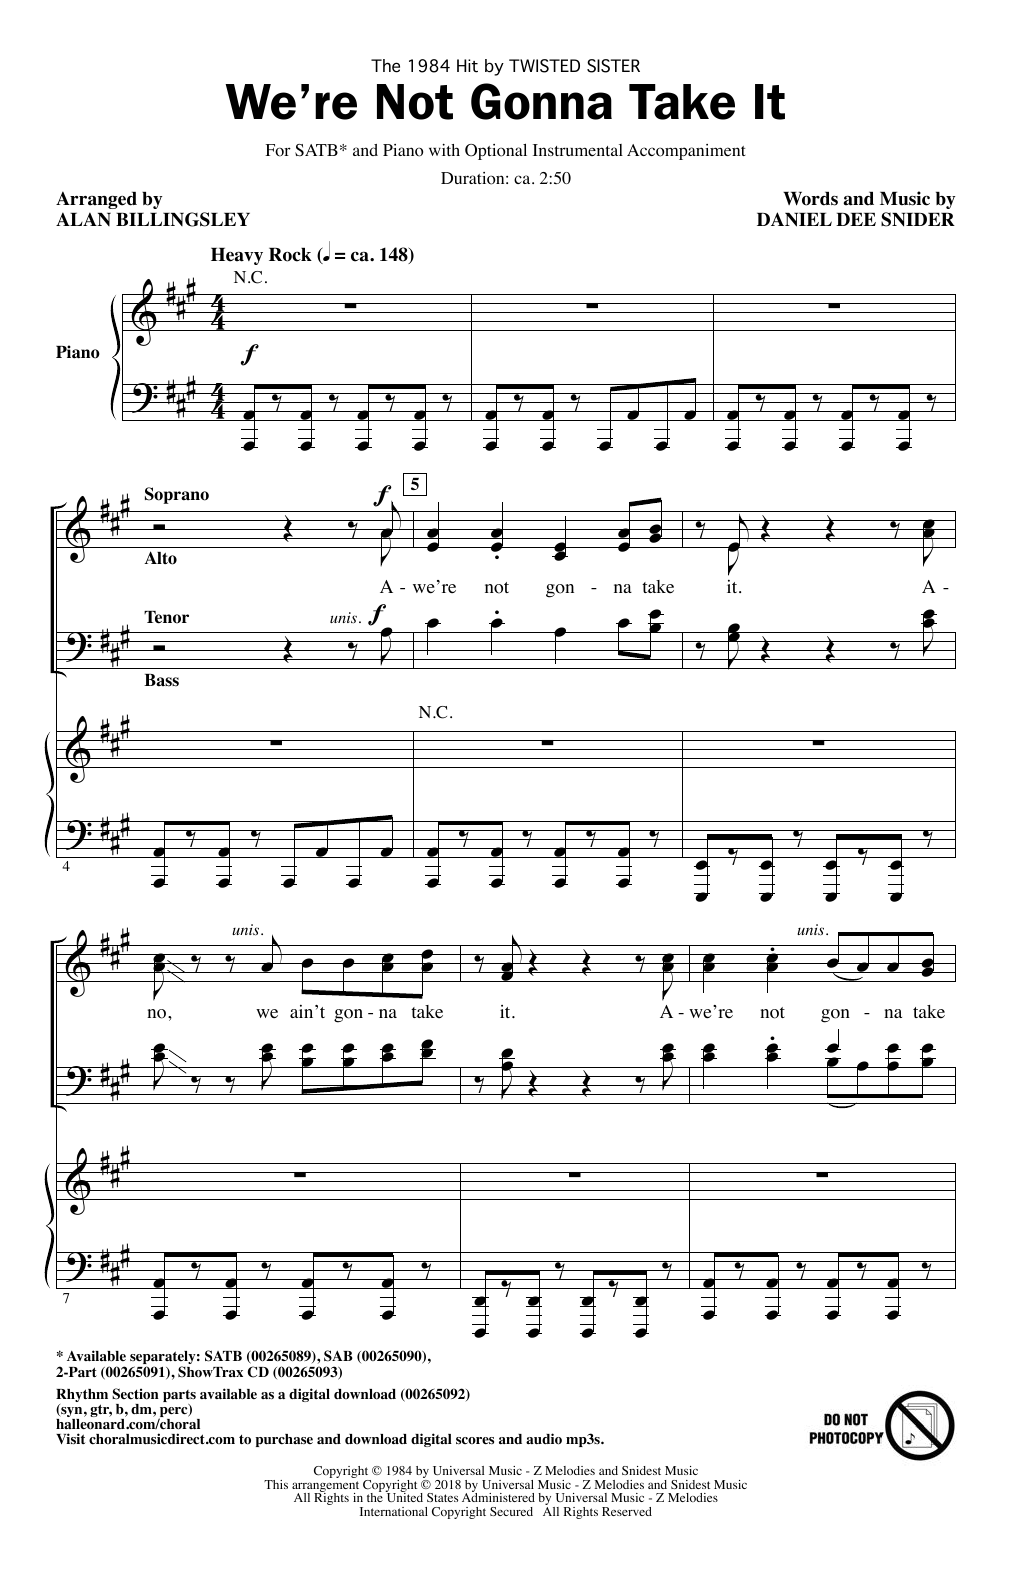 Alan Billingsley We're Not Gonna Take It sheet music notes and chords. Download Printable PDF.